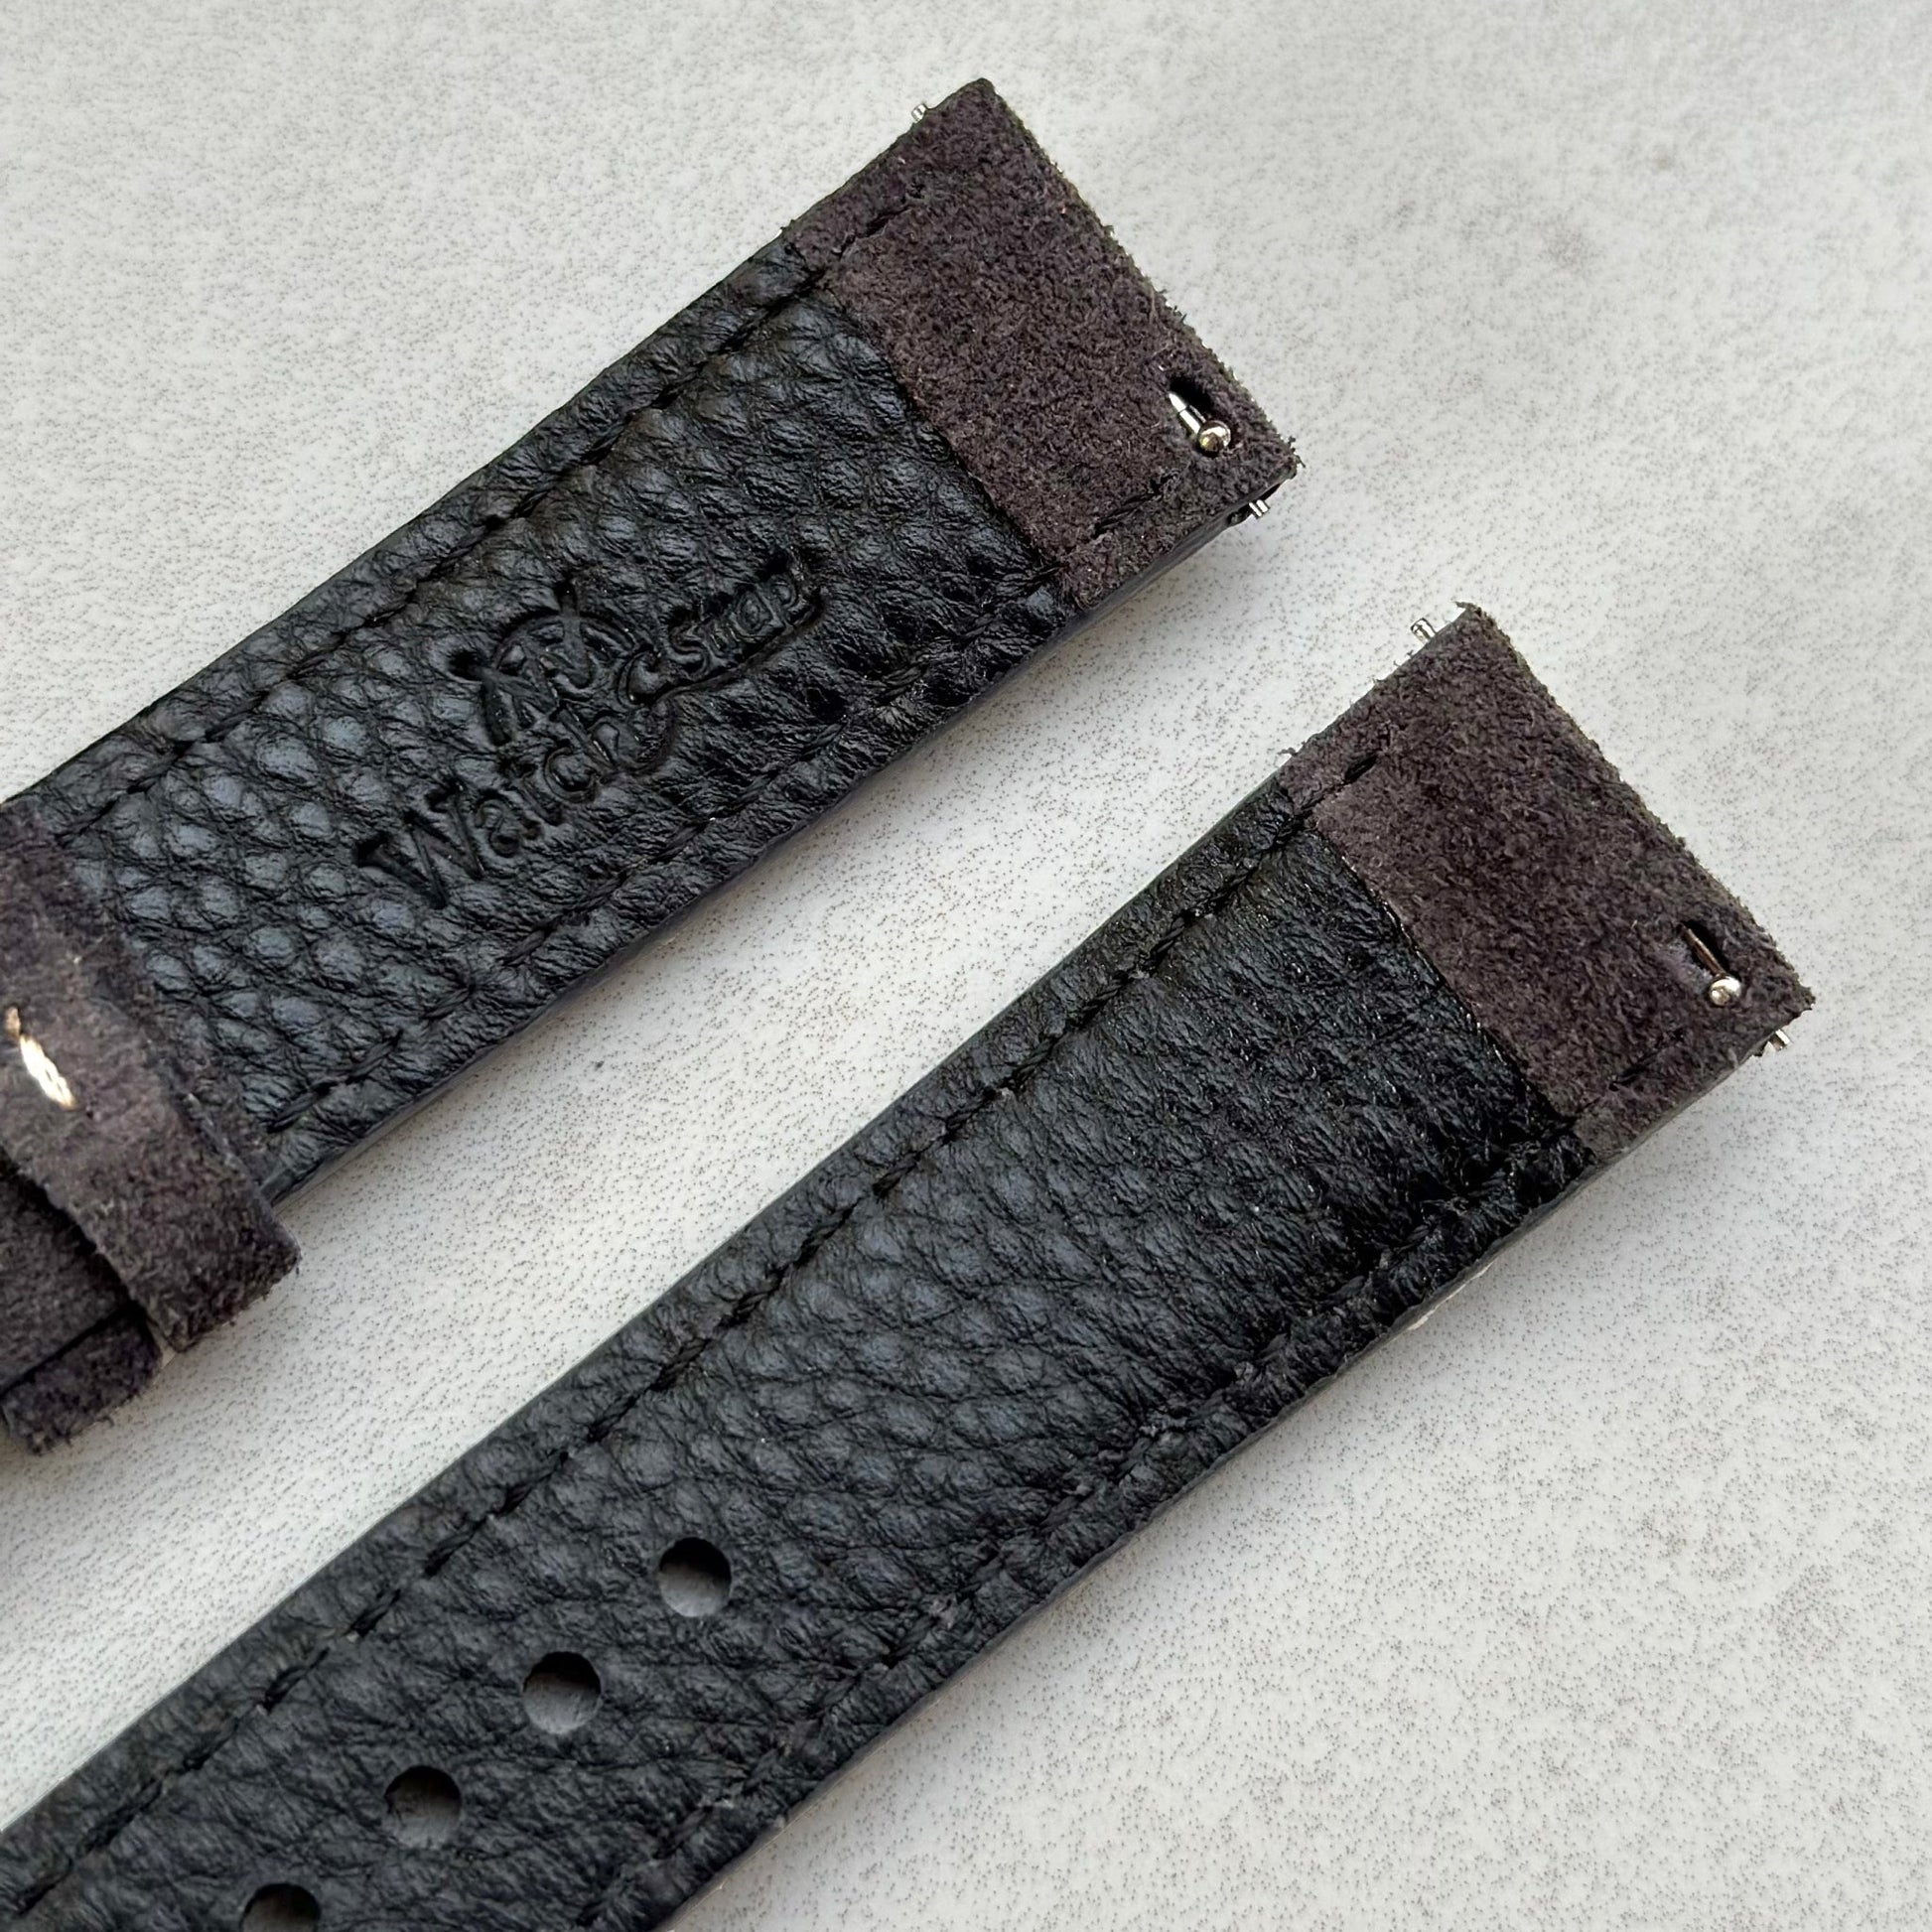 Quick release pins on the Paris gunmetal grey suede watch strap. Watch And Strap.